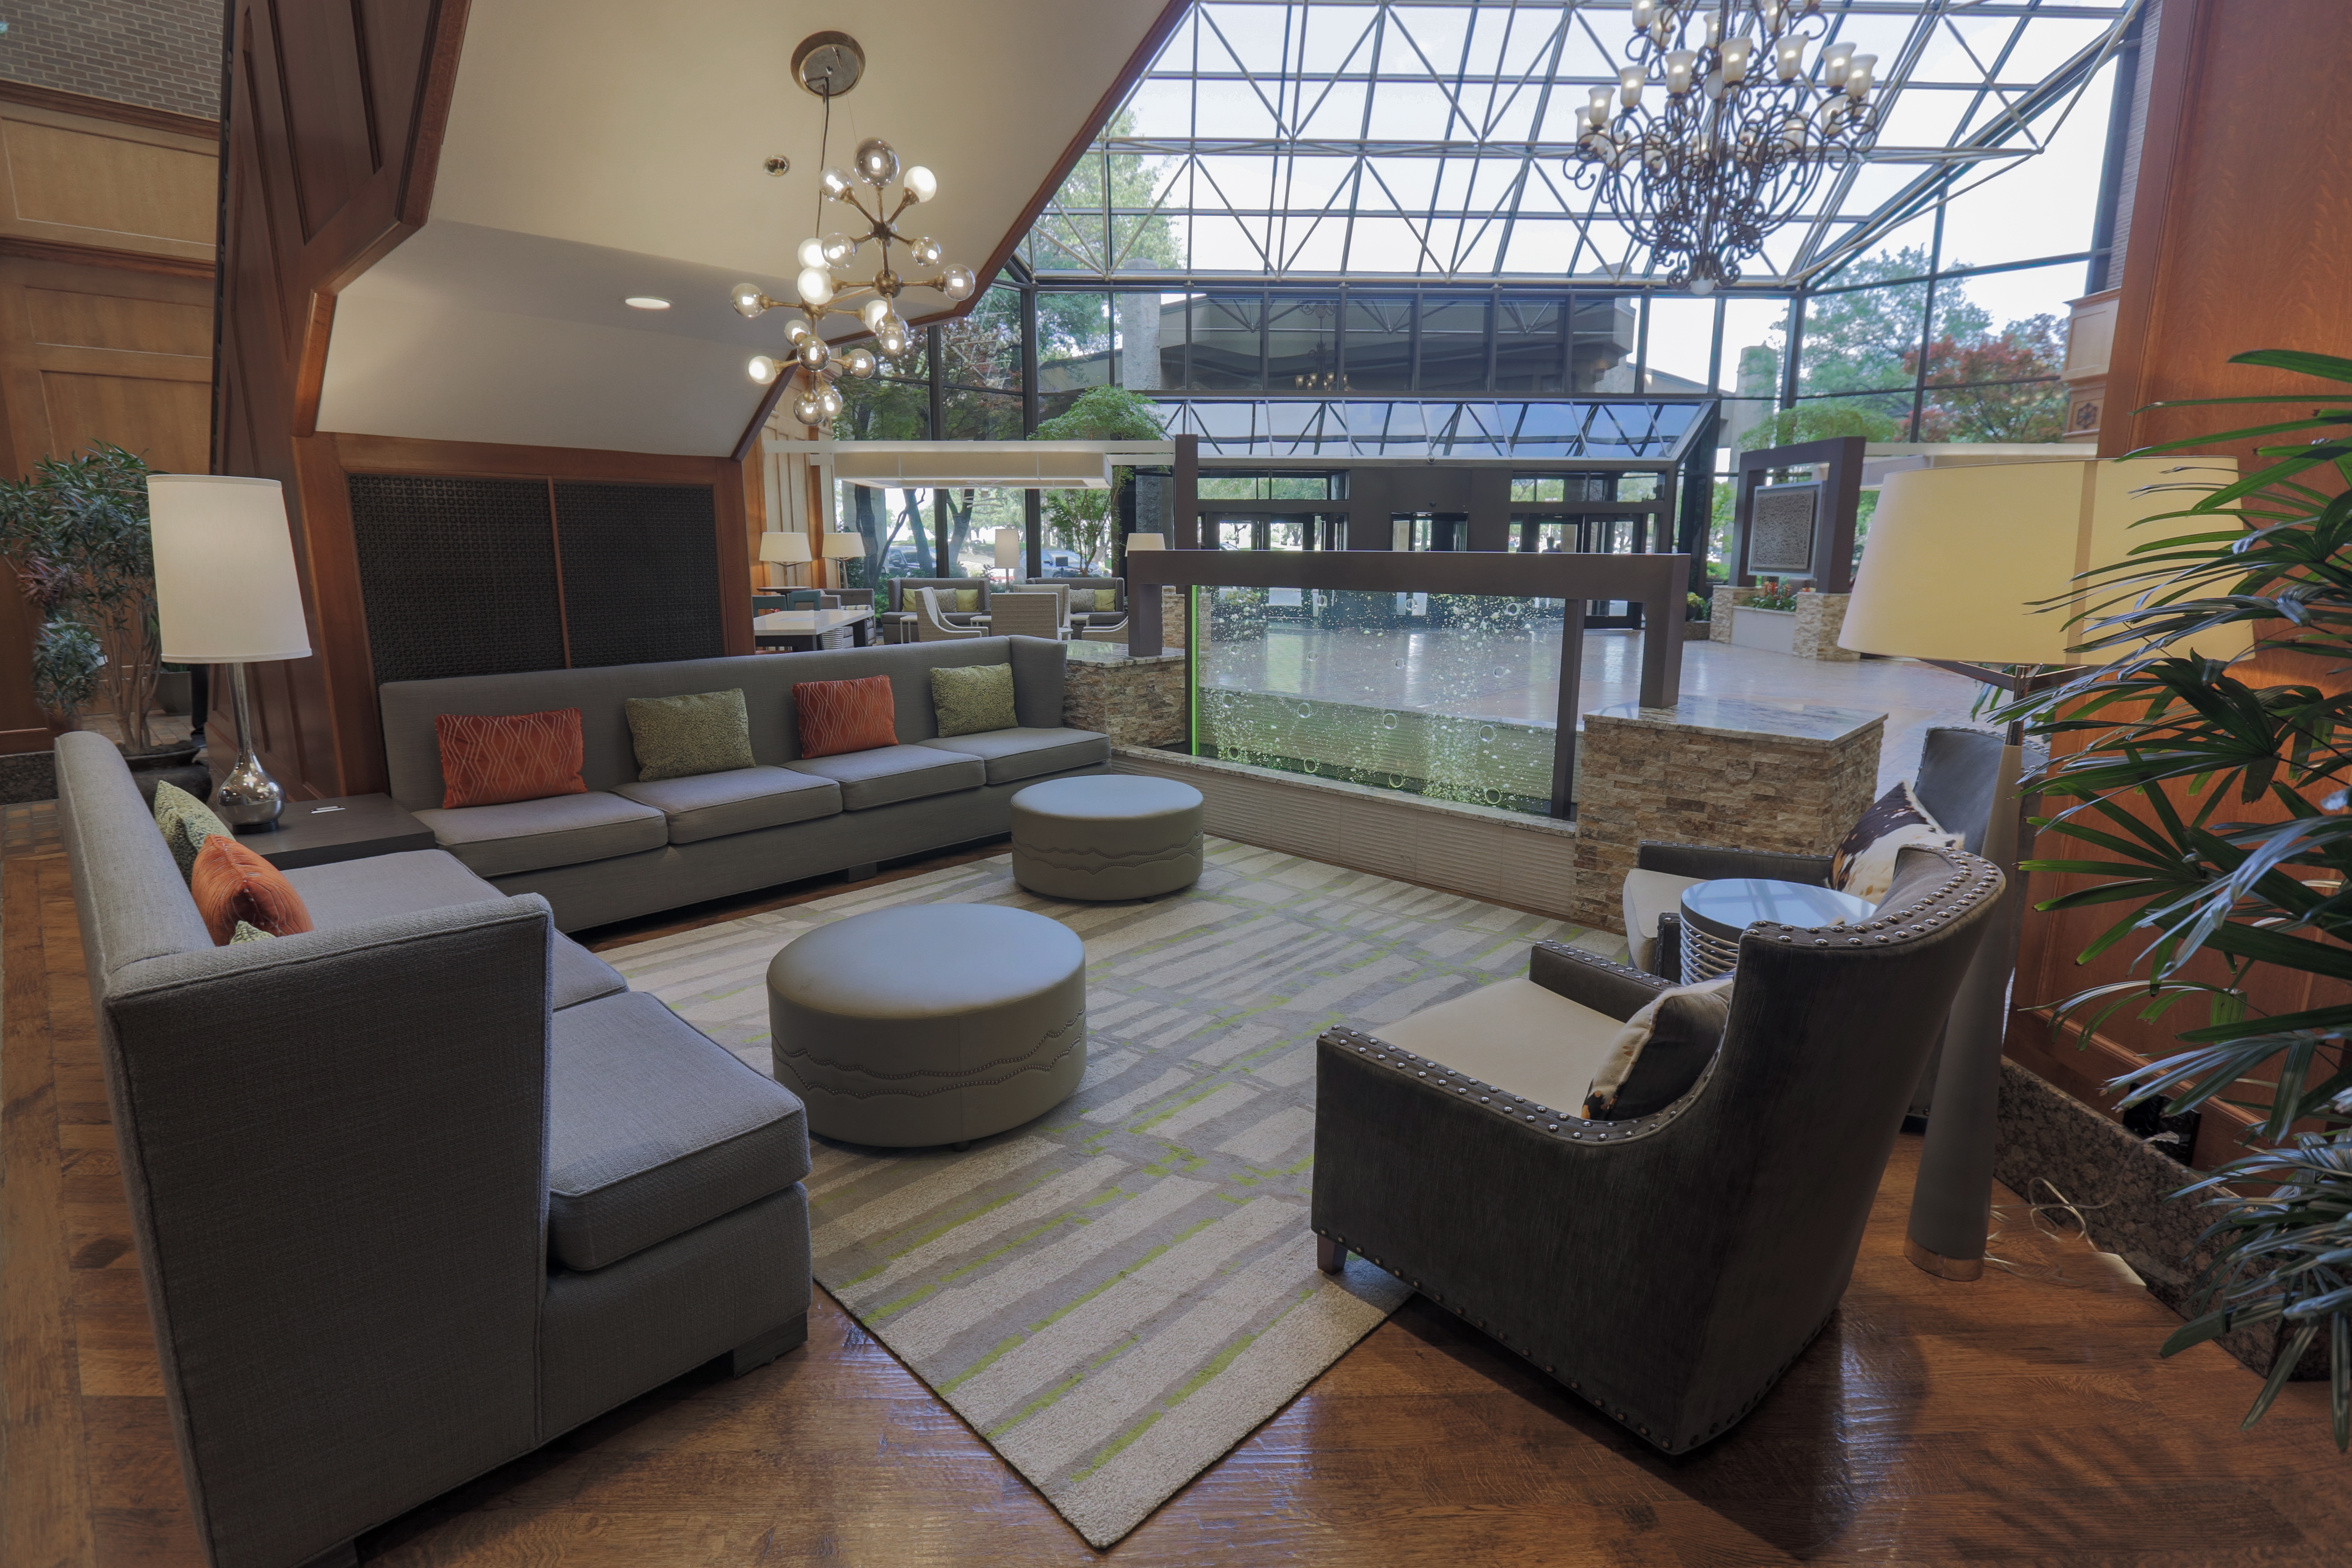 Lobby Seating Area with Couches and Footstools Next to a Floor to Ceiling Window Looking Over Hotel Entrance